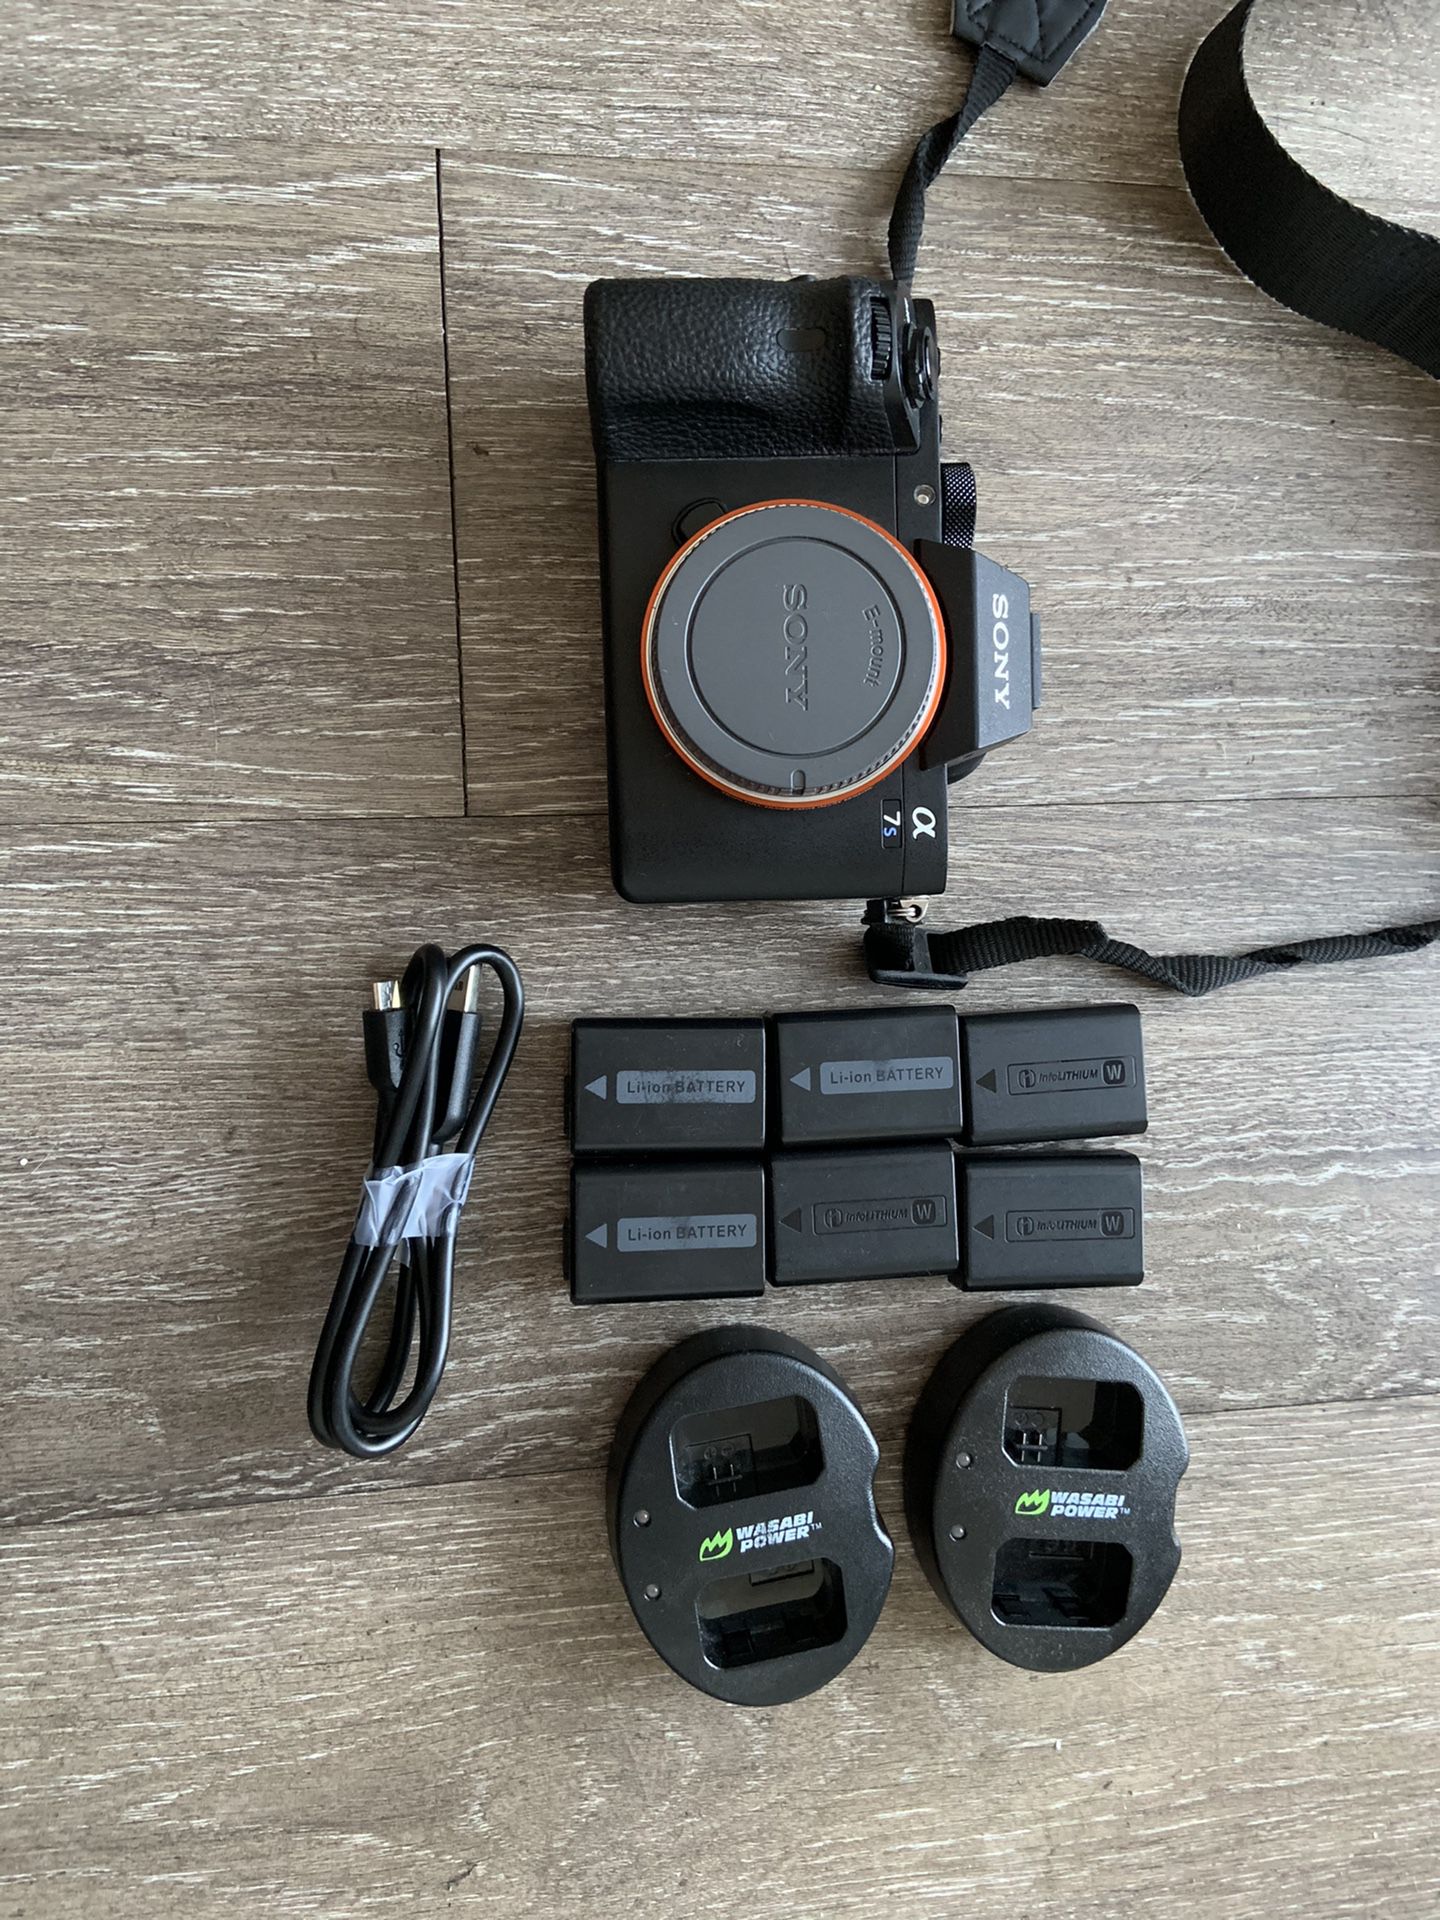 Sony a7s ii (6 batteries + 2 chargers)